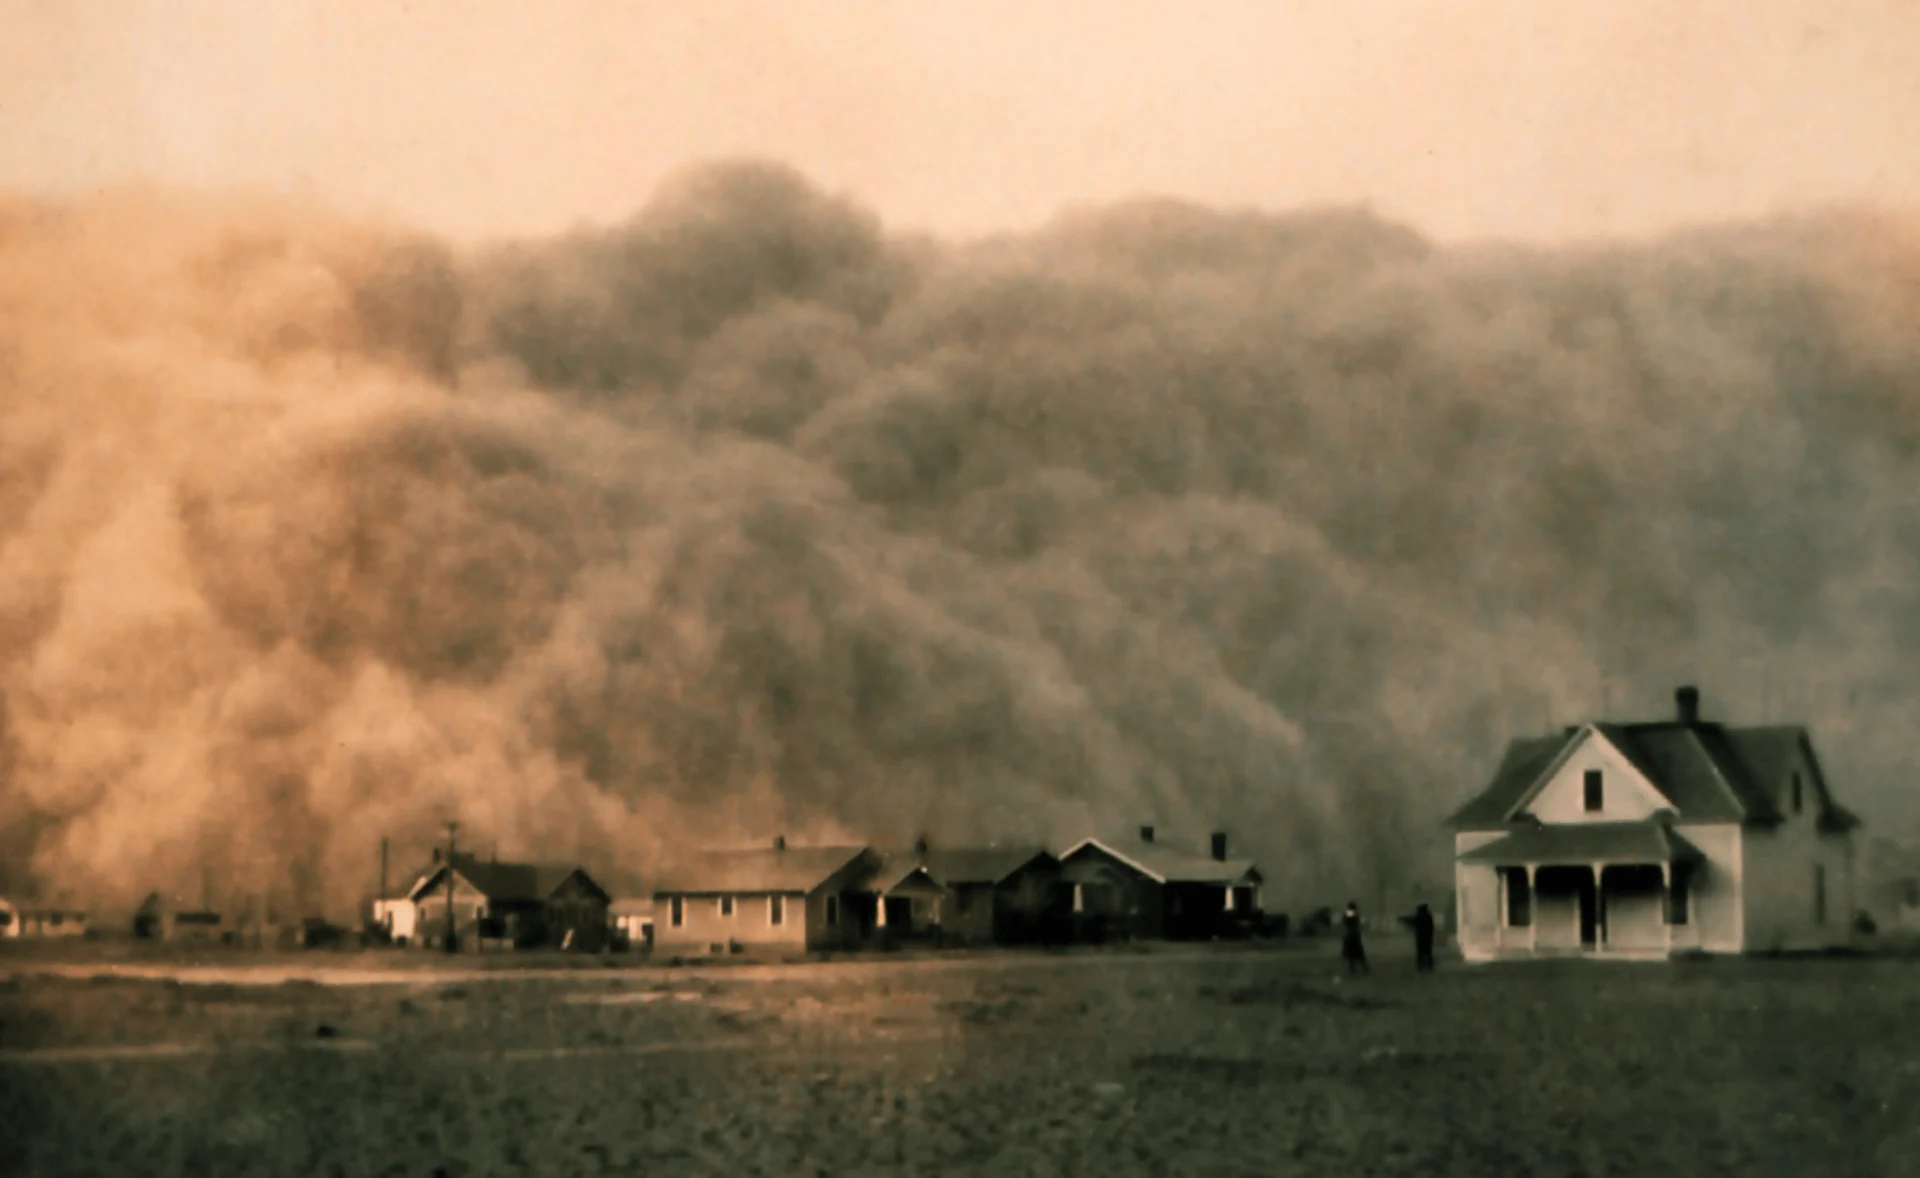 How improper farming methodology and drought caused the catastrophic Dust Bowl